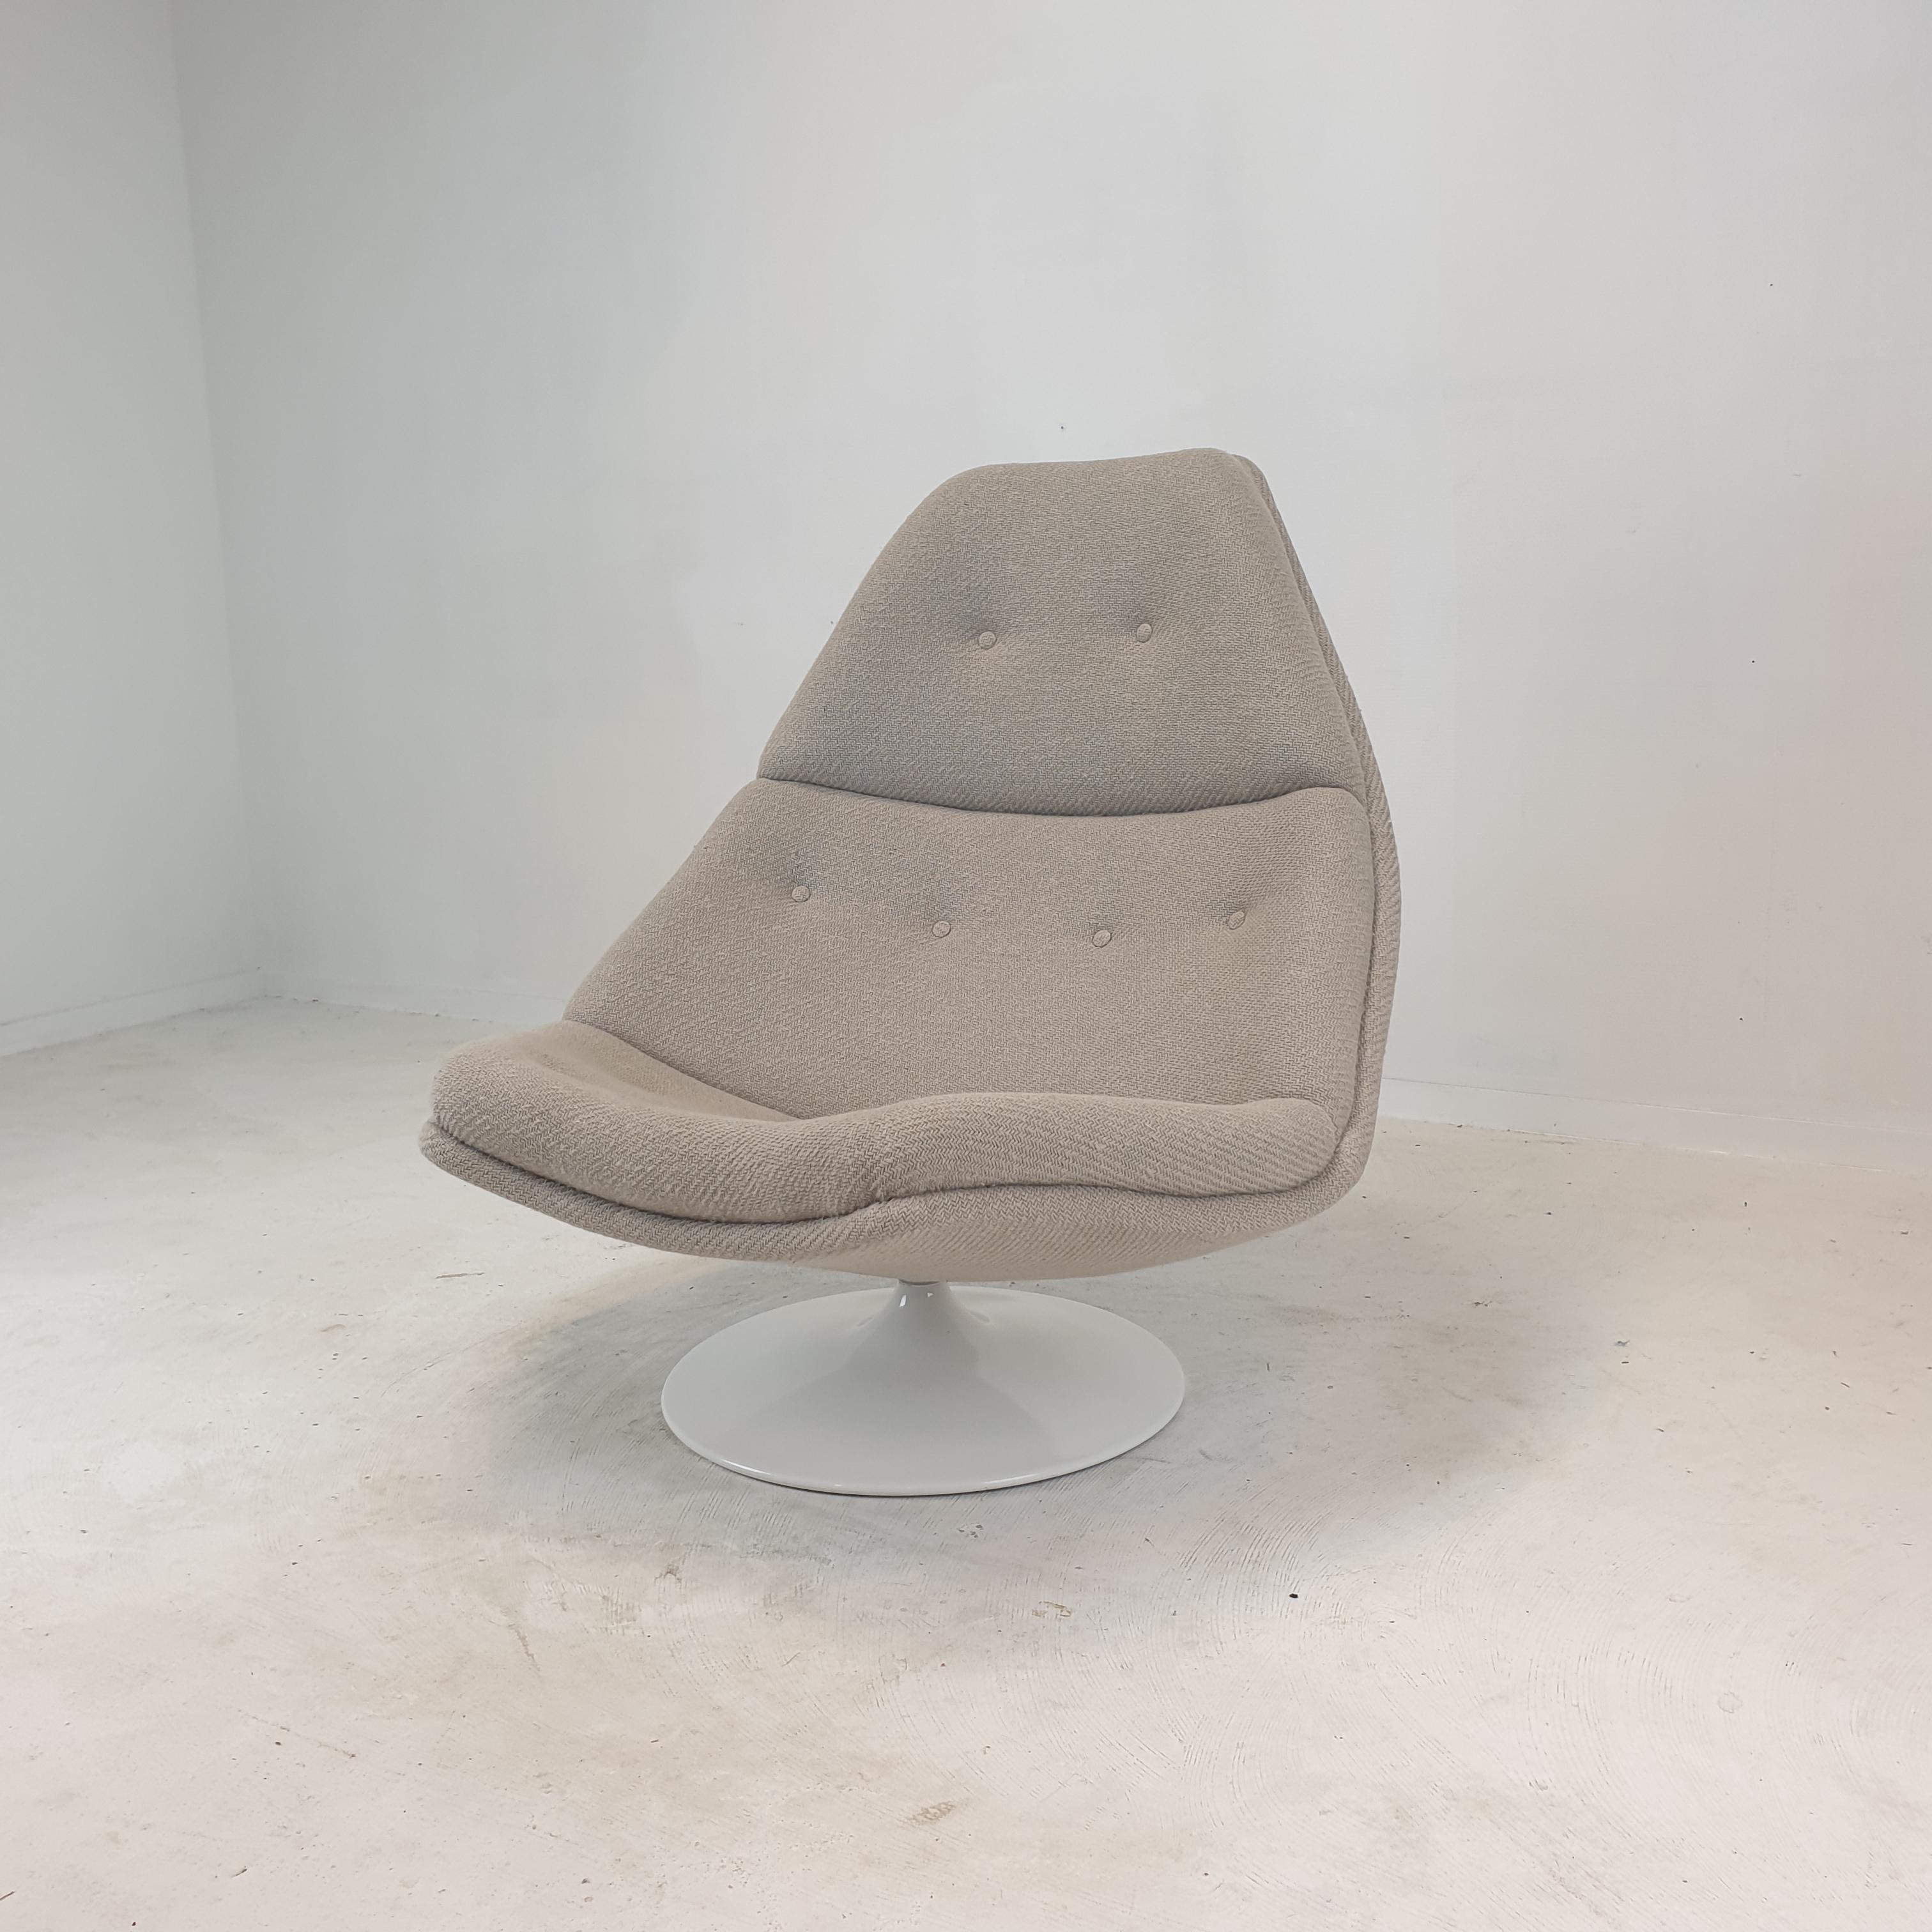 Very comfortable Artifort model F510 lounge chair. 
Designed by the famous English designer Geoffrey Harcourt in the 60's. 

The chair is just restored with new fabric and new foam.
It is reupholstered with a stunning coarse woven natural look